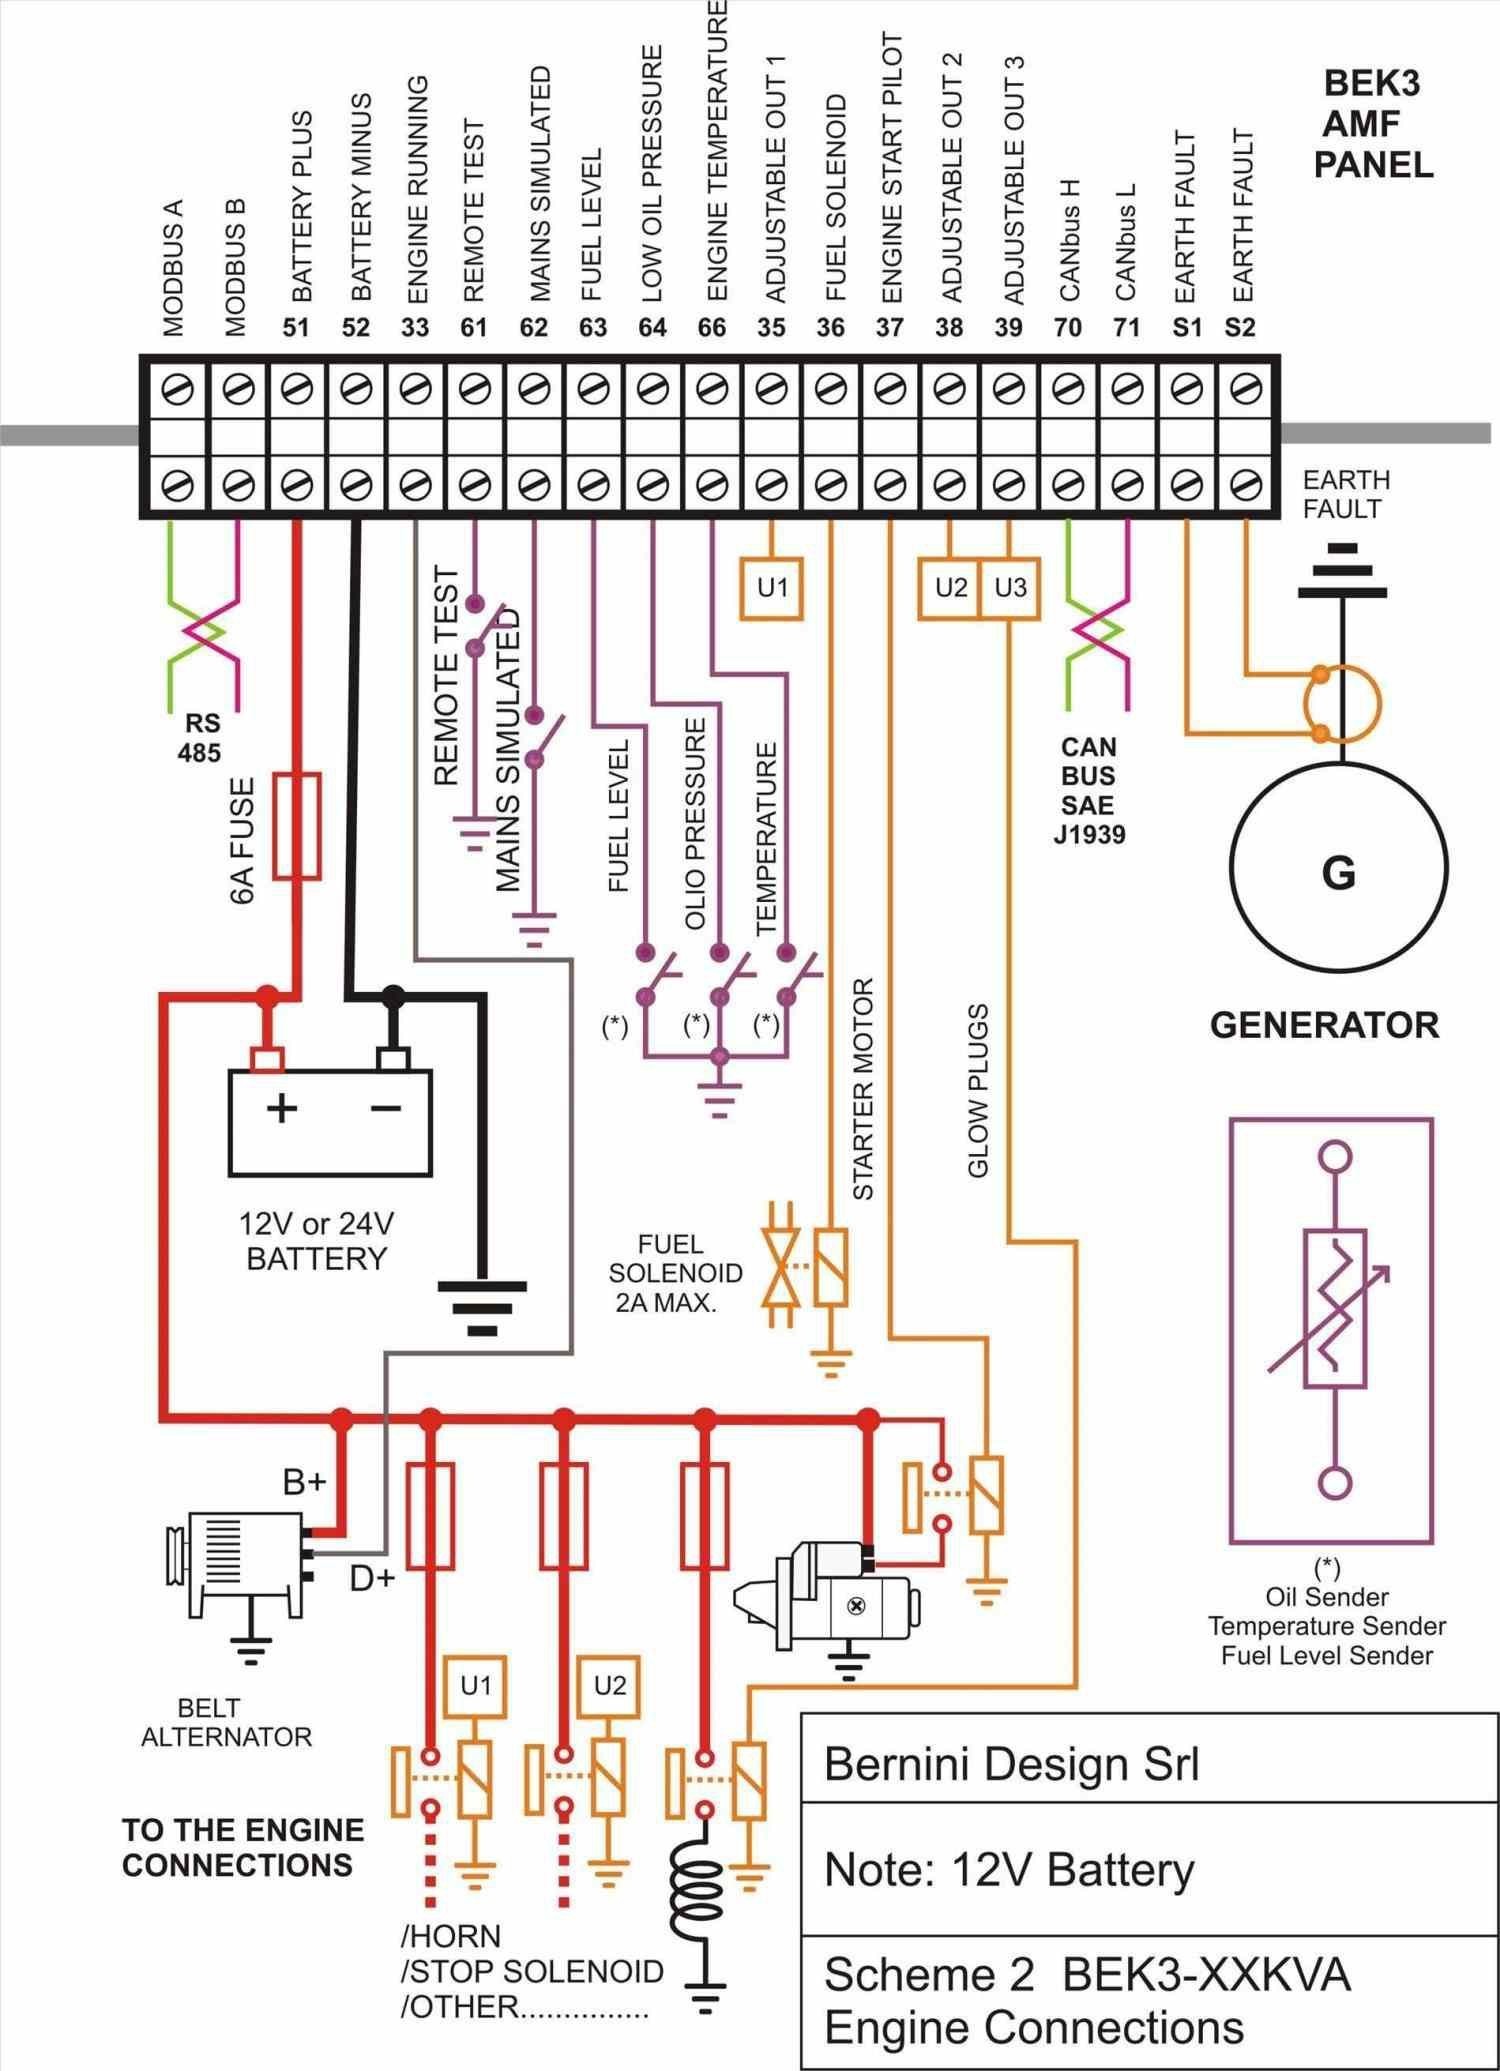 Gas Furnace Thermostat Wiring Diagram Awesome Honeywell Heat Pump Trane Tud120r 2 Heating And